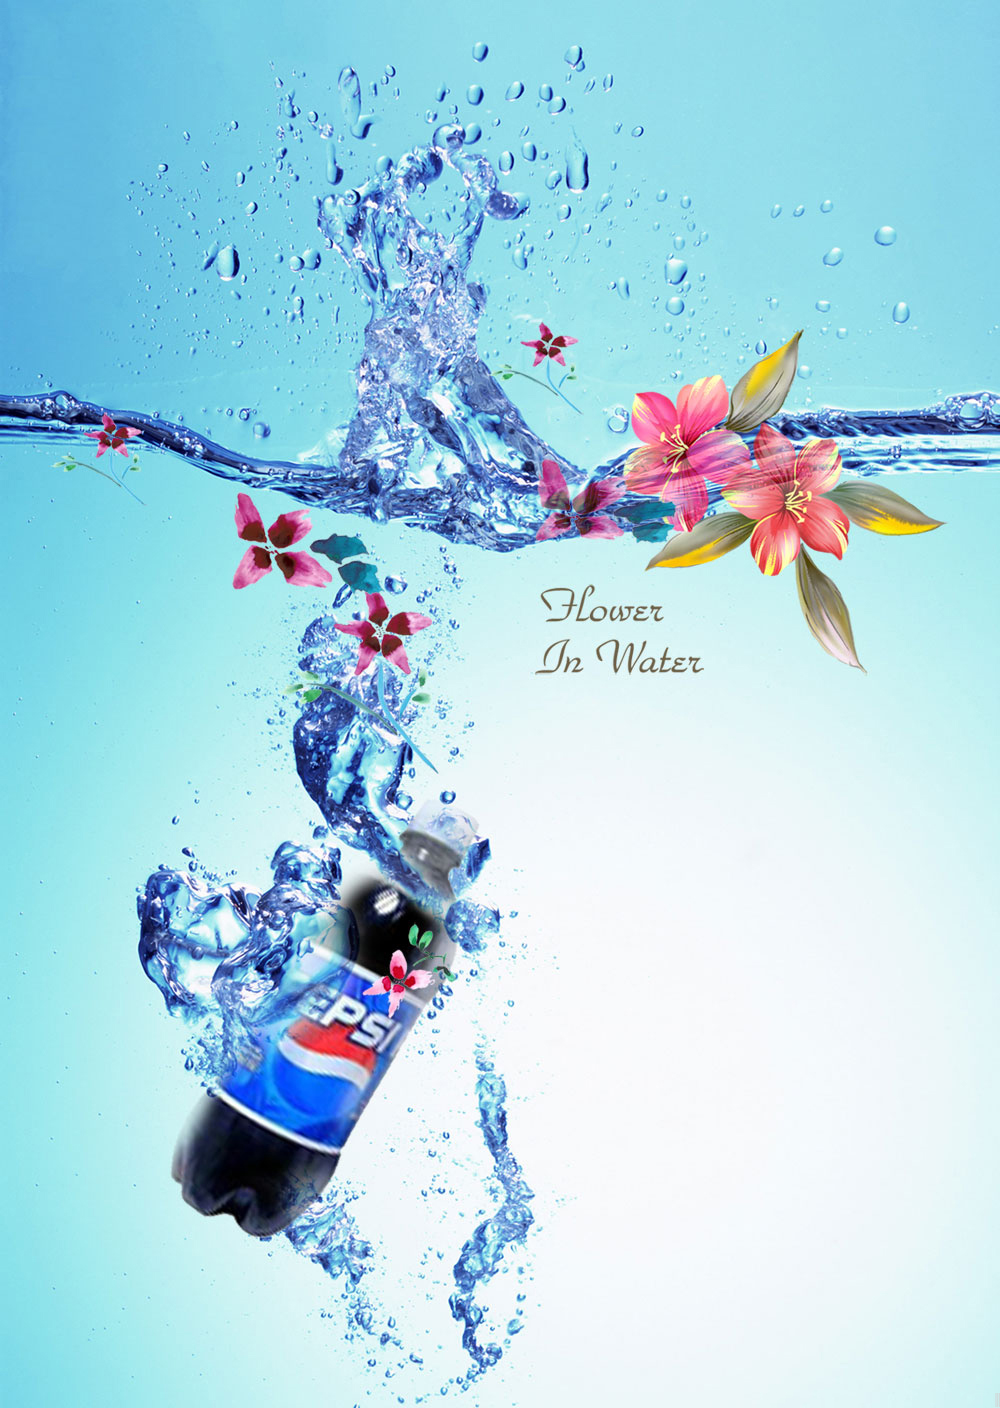 Create and Design Pepsi Ad with Photoshop